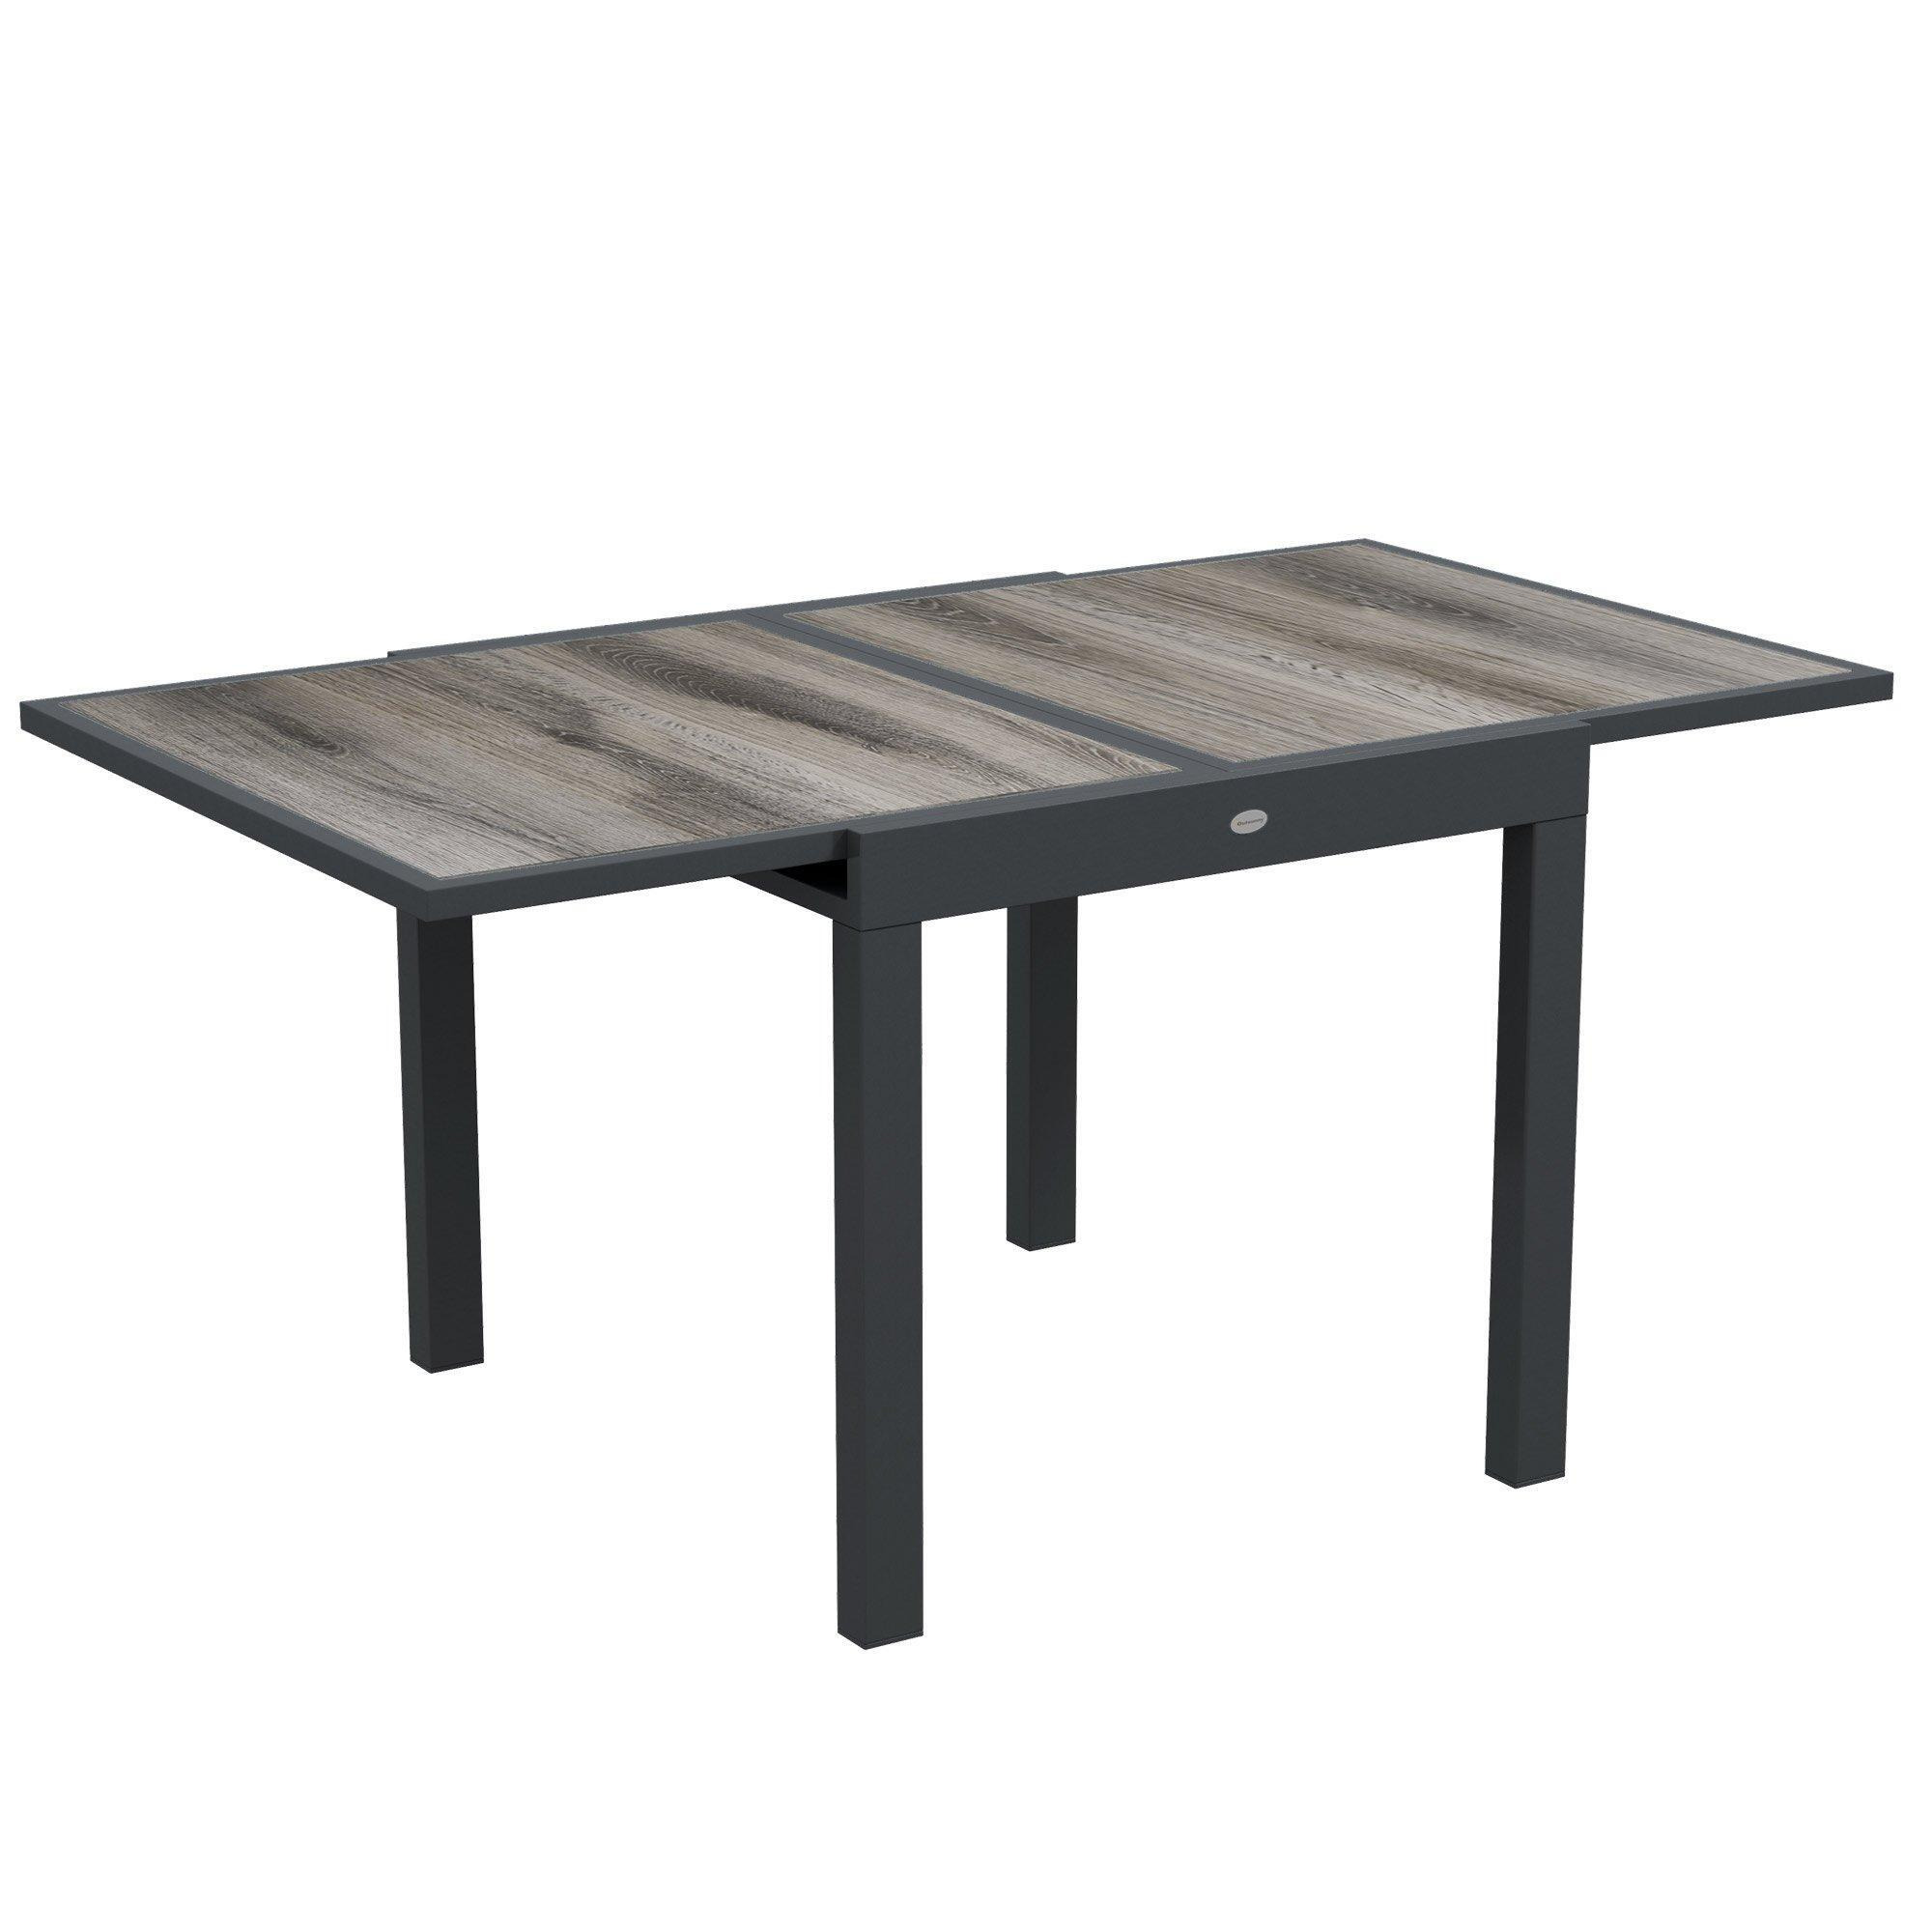 Extendable Outdoor Dining Table Aluminium Rectangle Patio Table - image 1